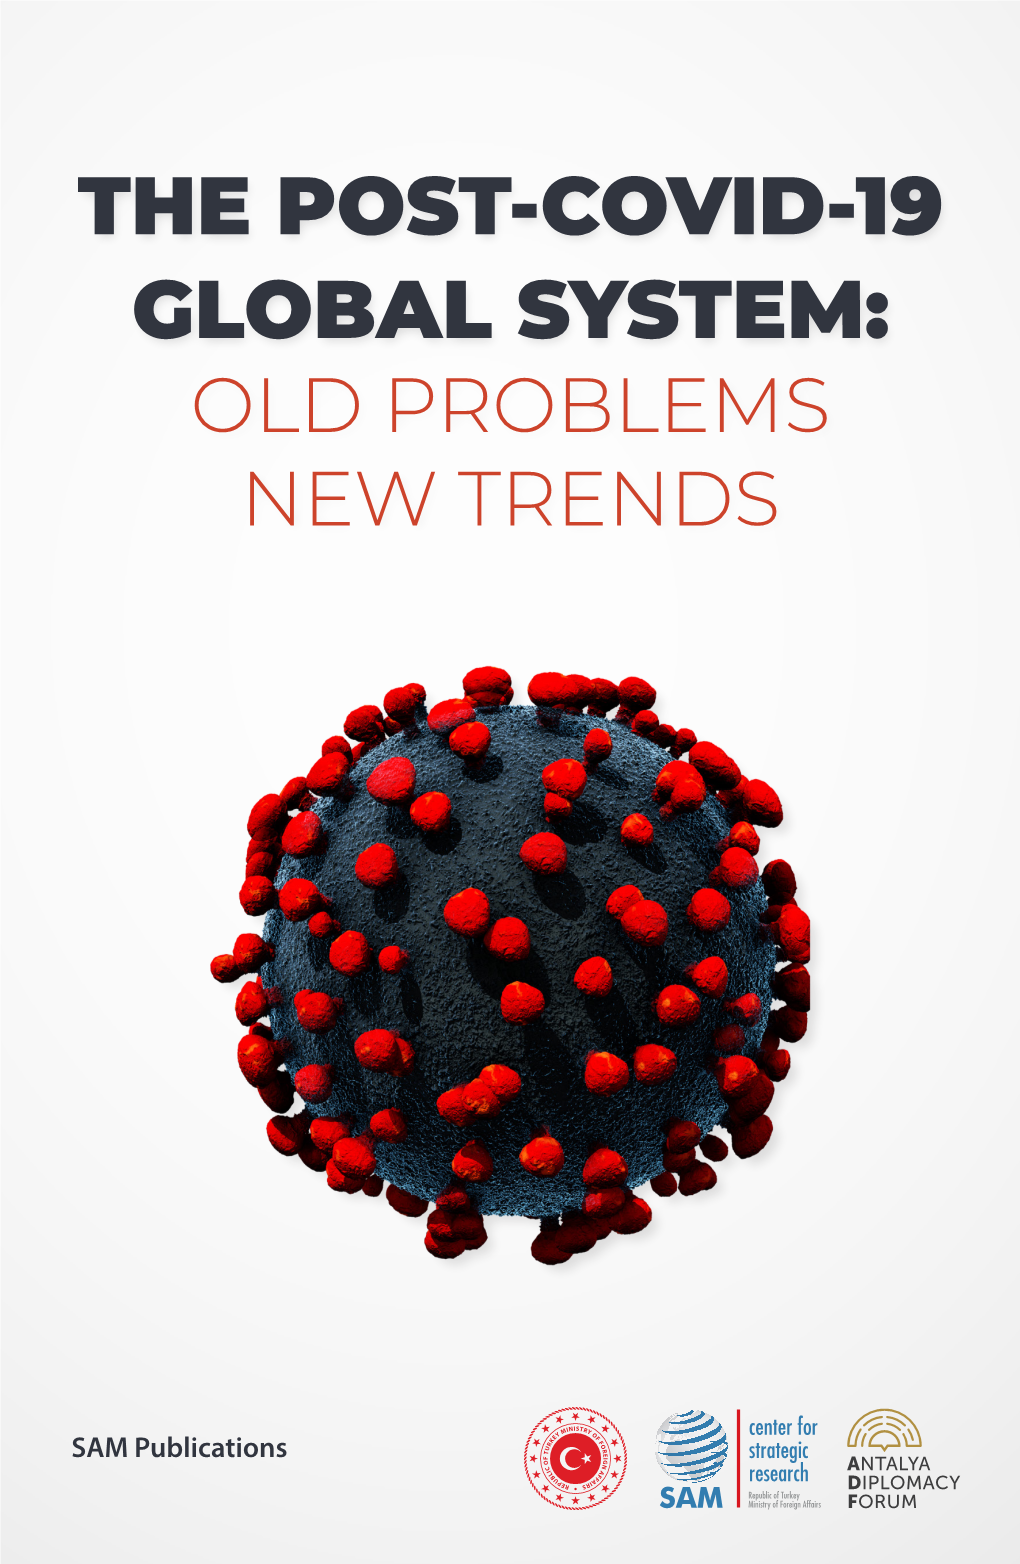 The Post-Covid-19 Global System: Old Problems New Trends